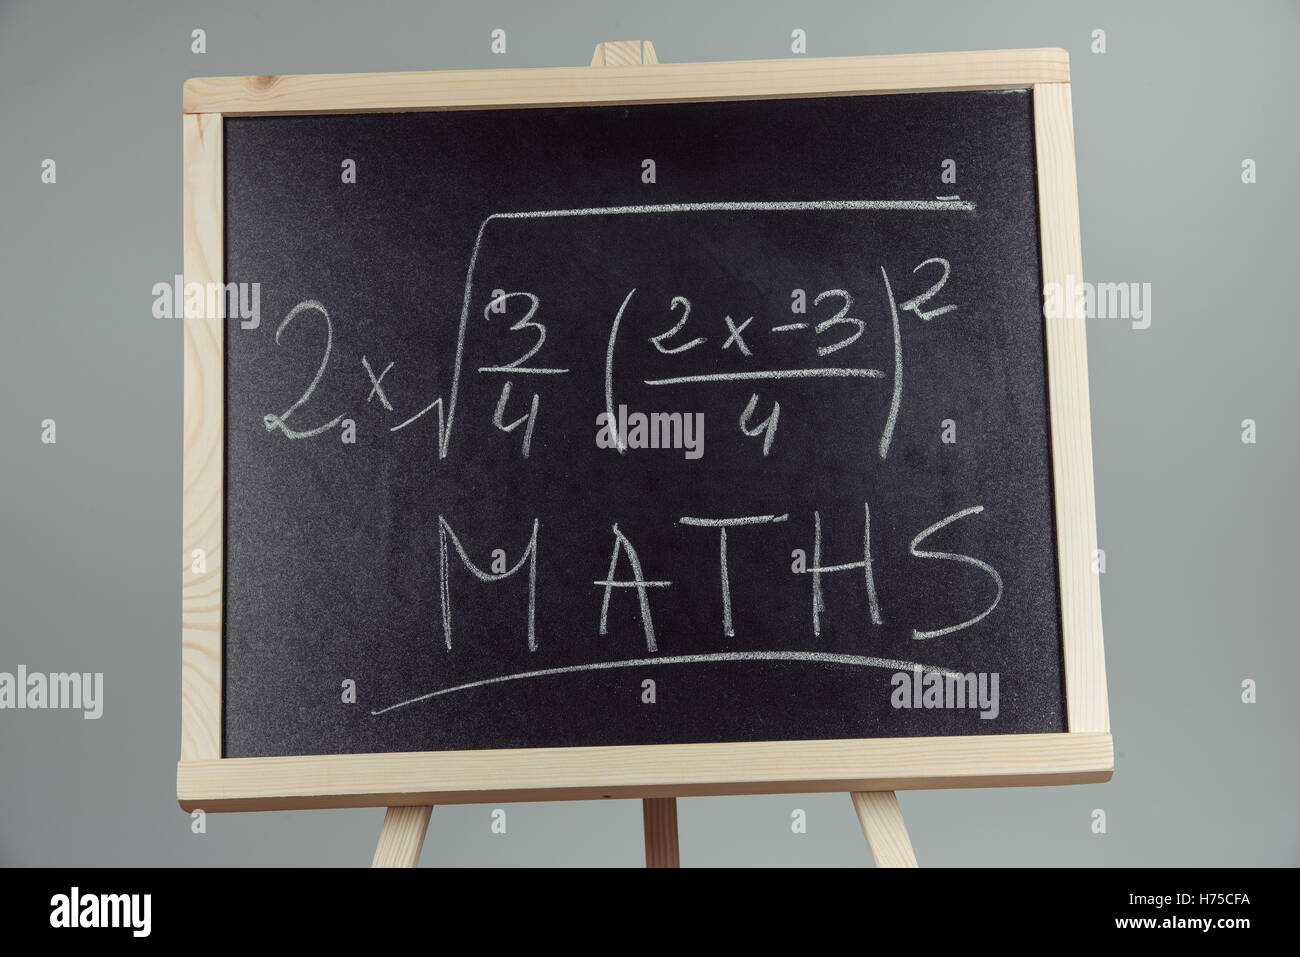 Math exercise written on the chalkboard. Gray background Stock Photo